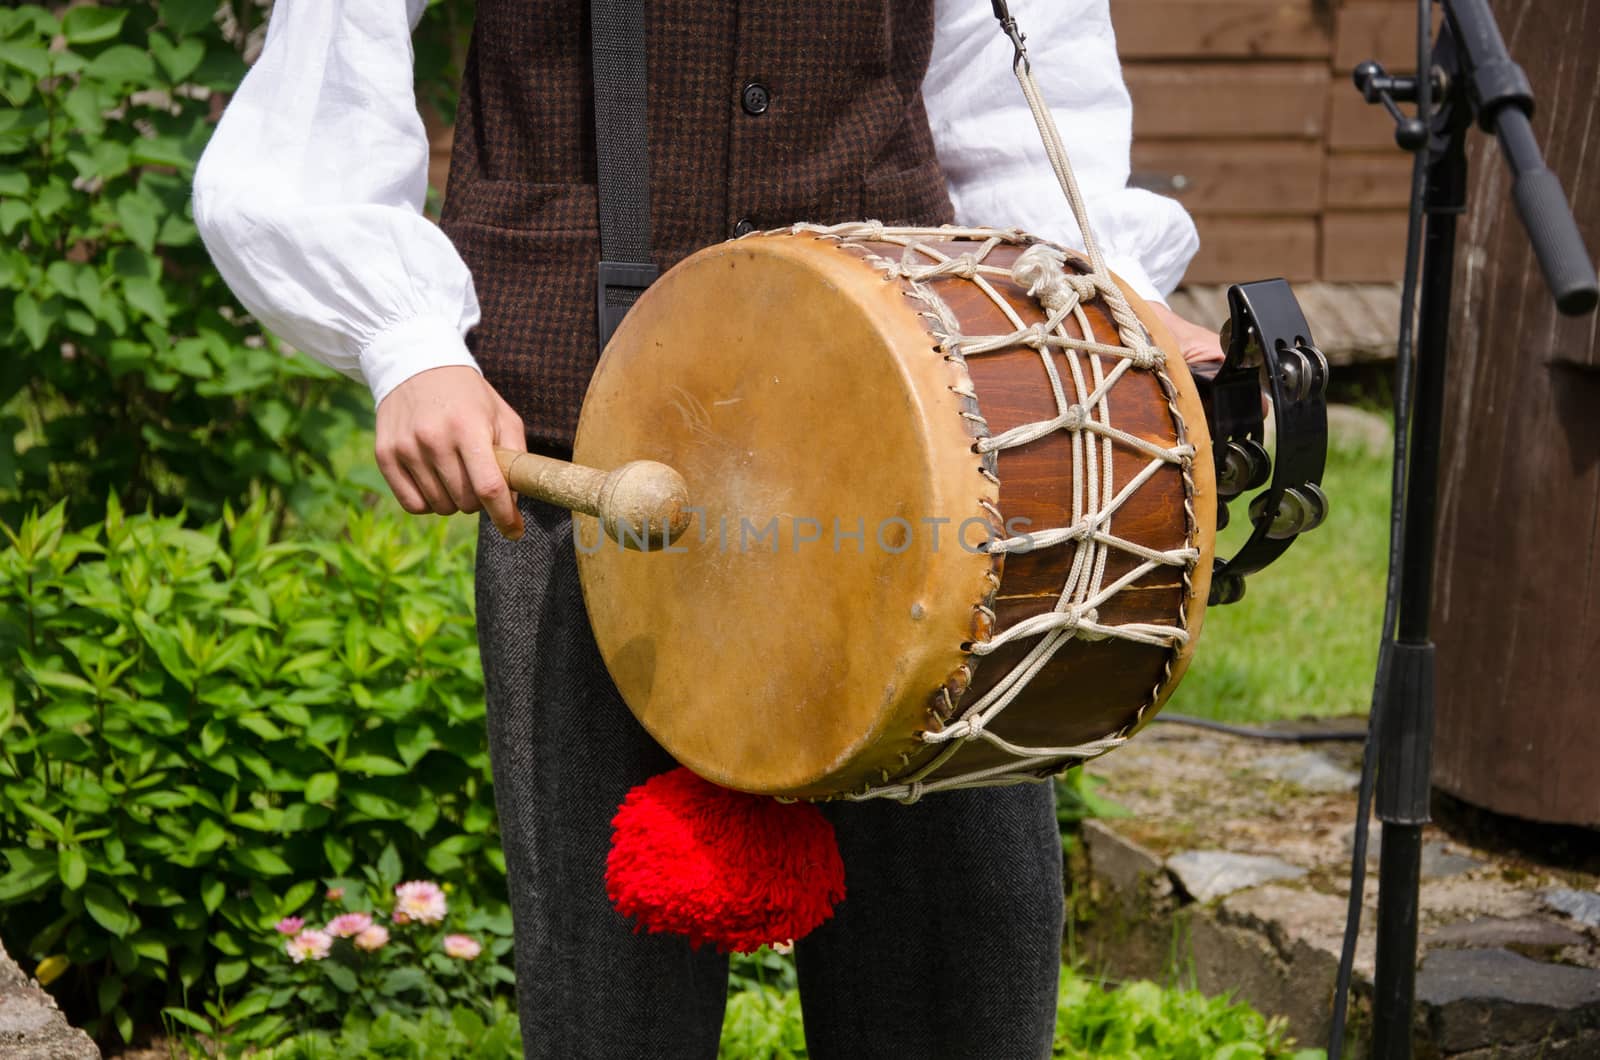 Drummer play folk music with drum and stick by sauletas